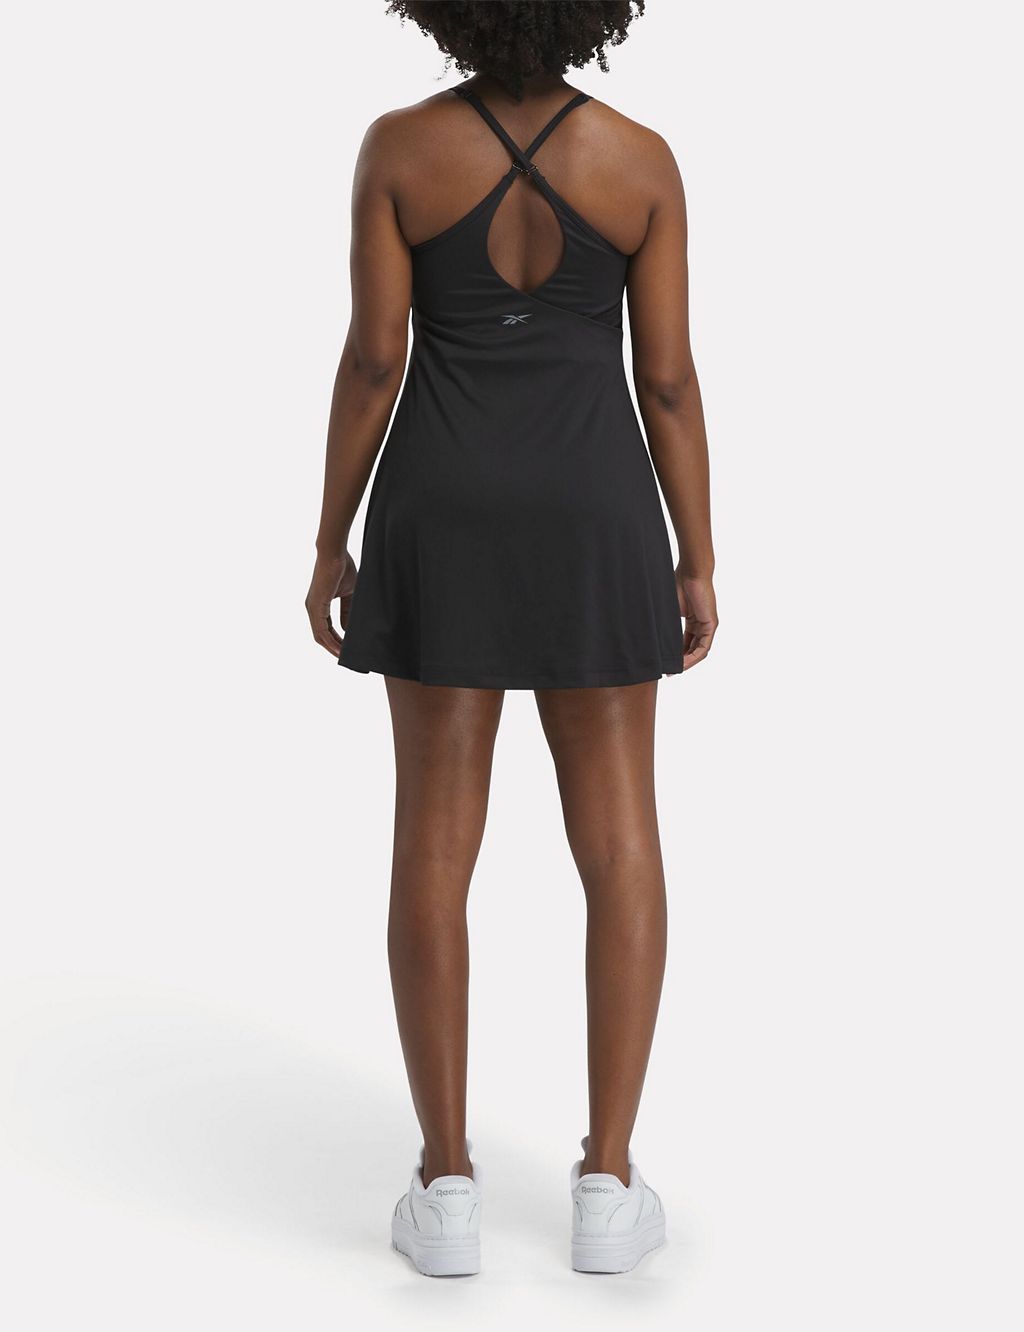 Lux Strappy Sports Dress 2 of 6